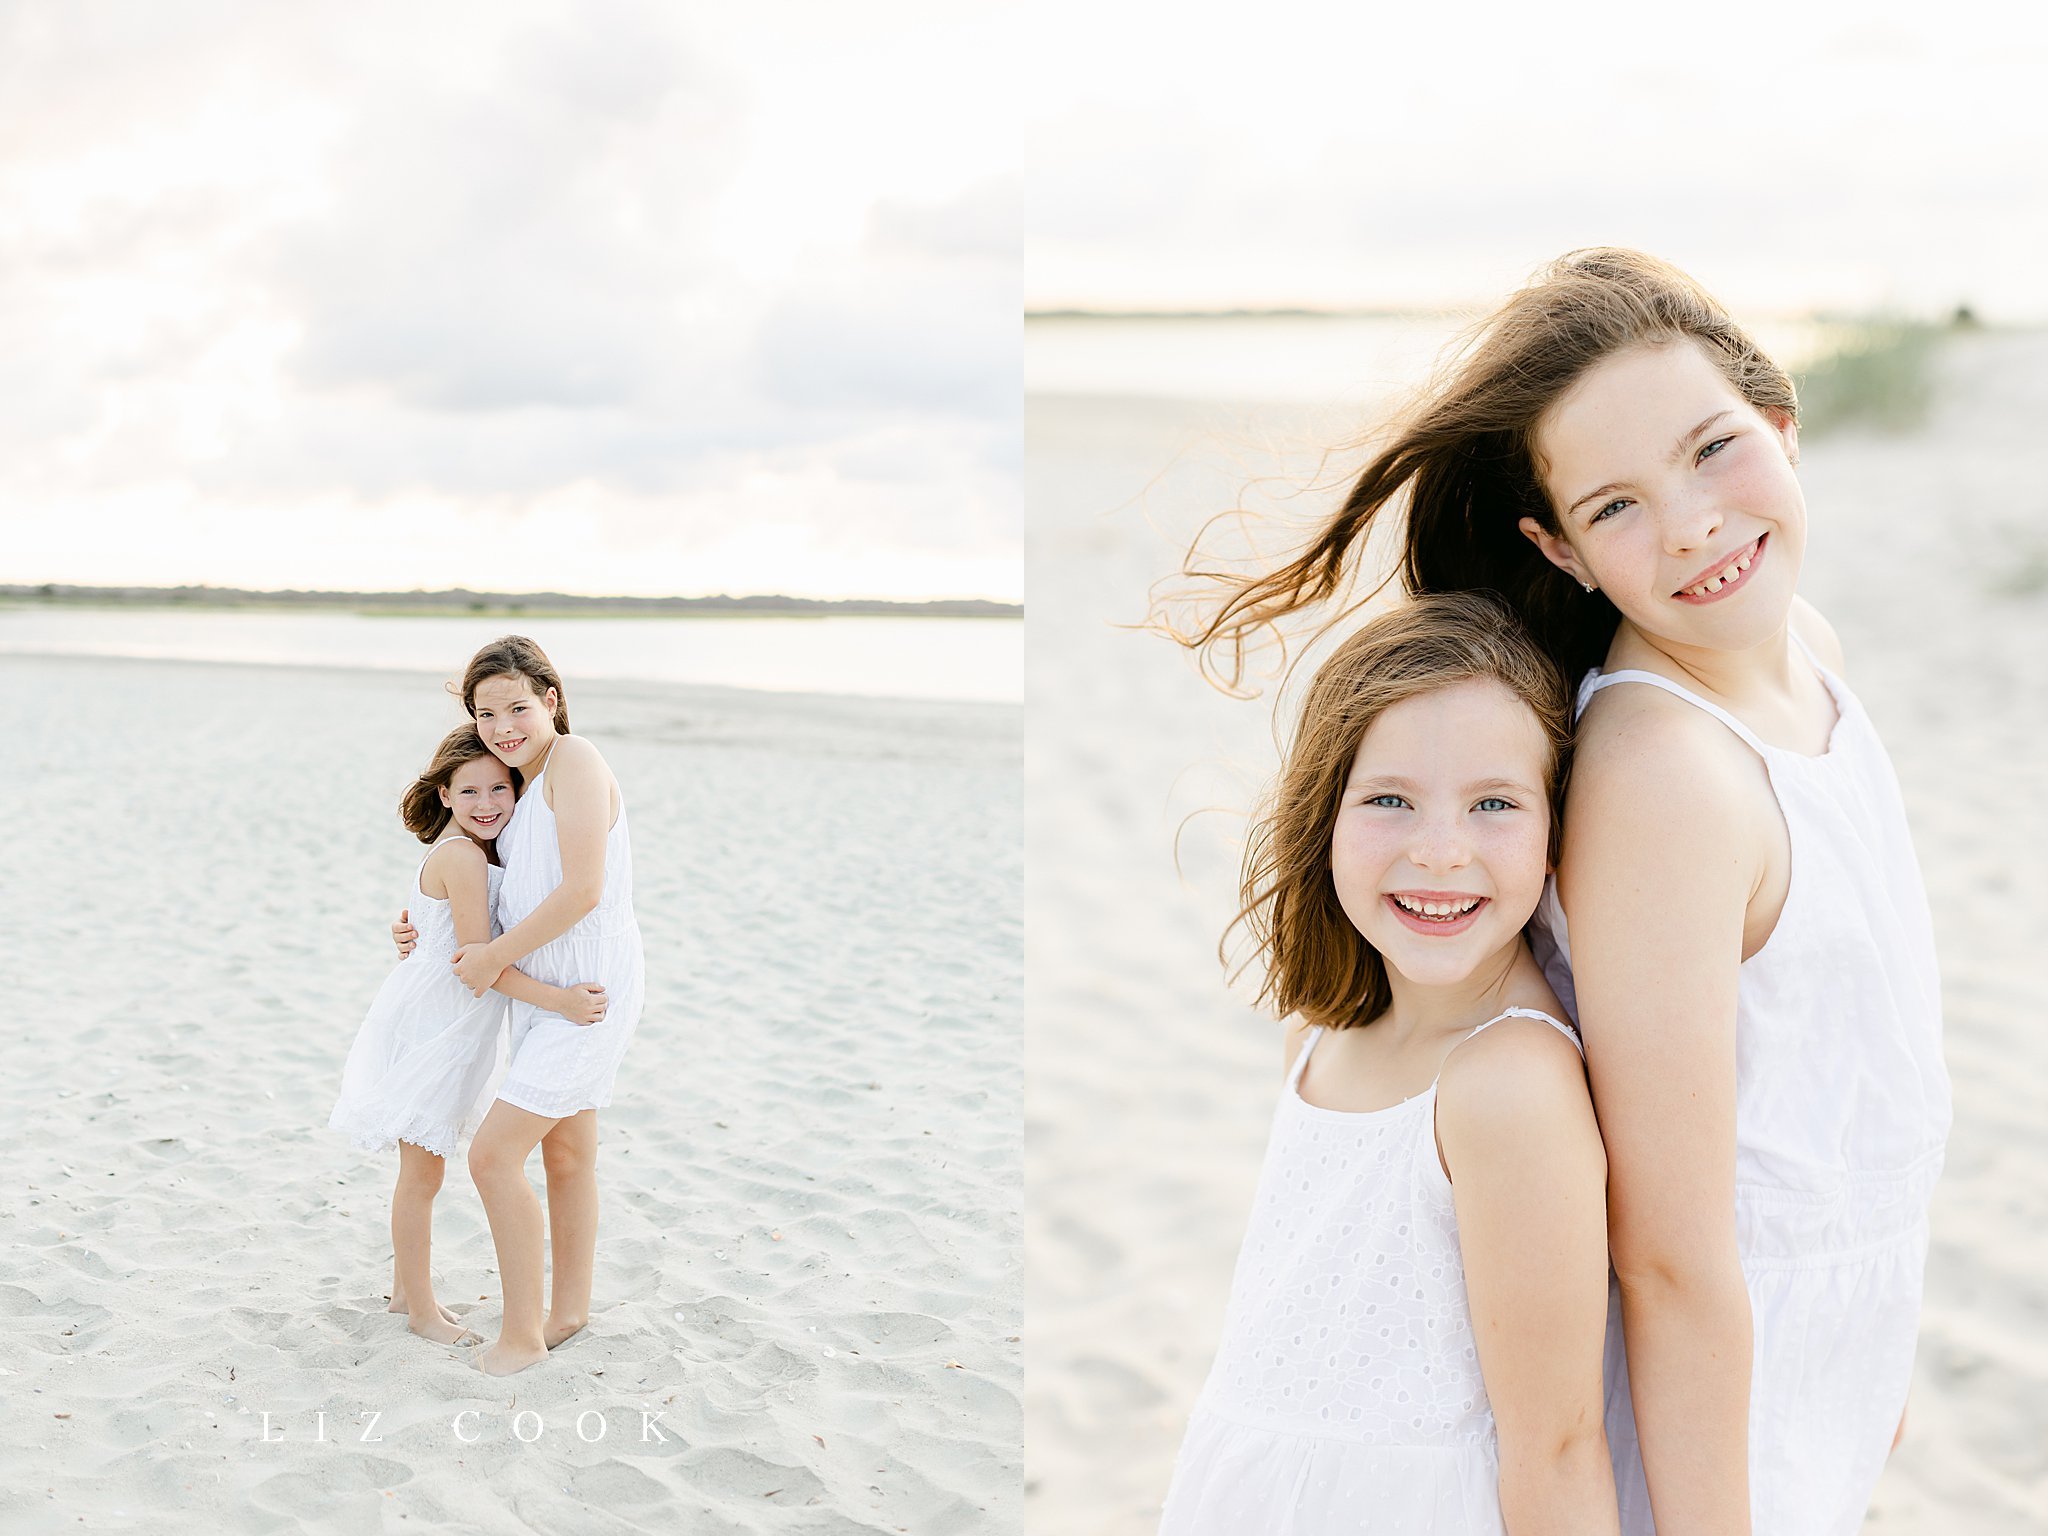 maternity-pictures-on-beach-liz-cook-photography-caroline-jean-photography_0005.jpg